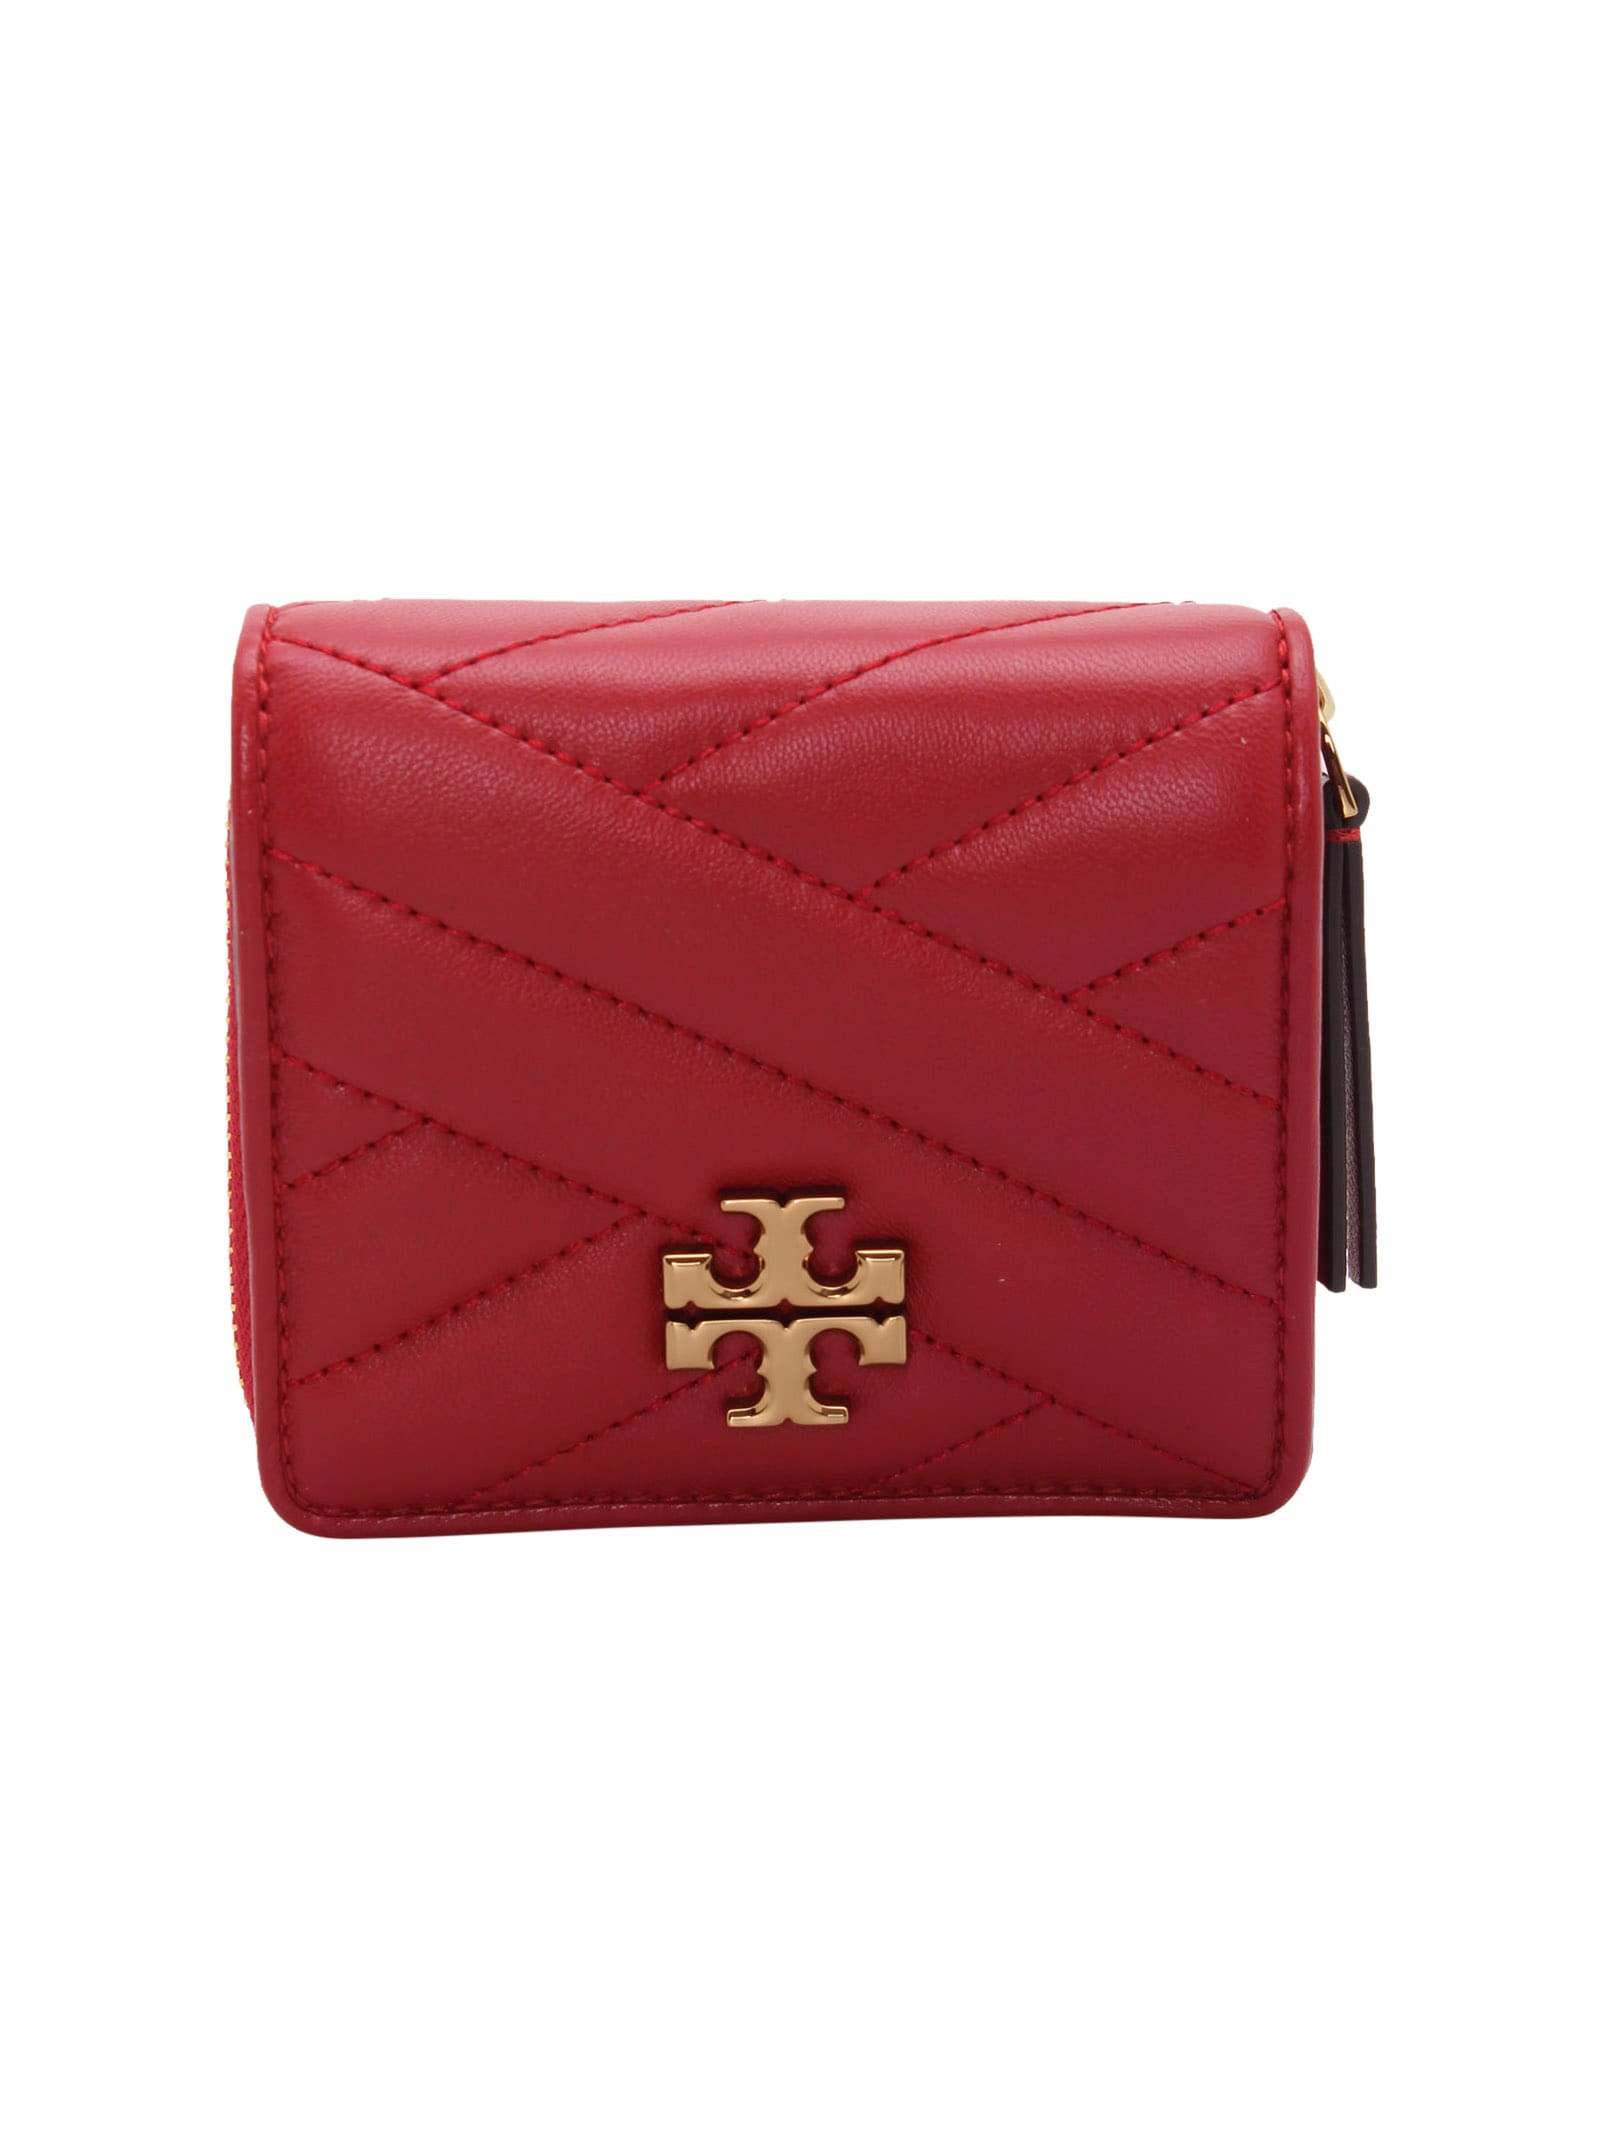 TORY BURCH LEATHER WALLET,11261097